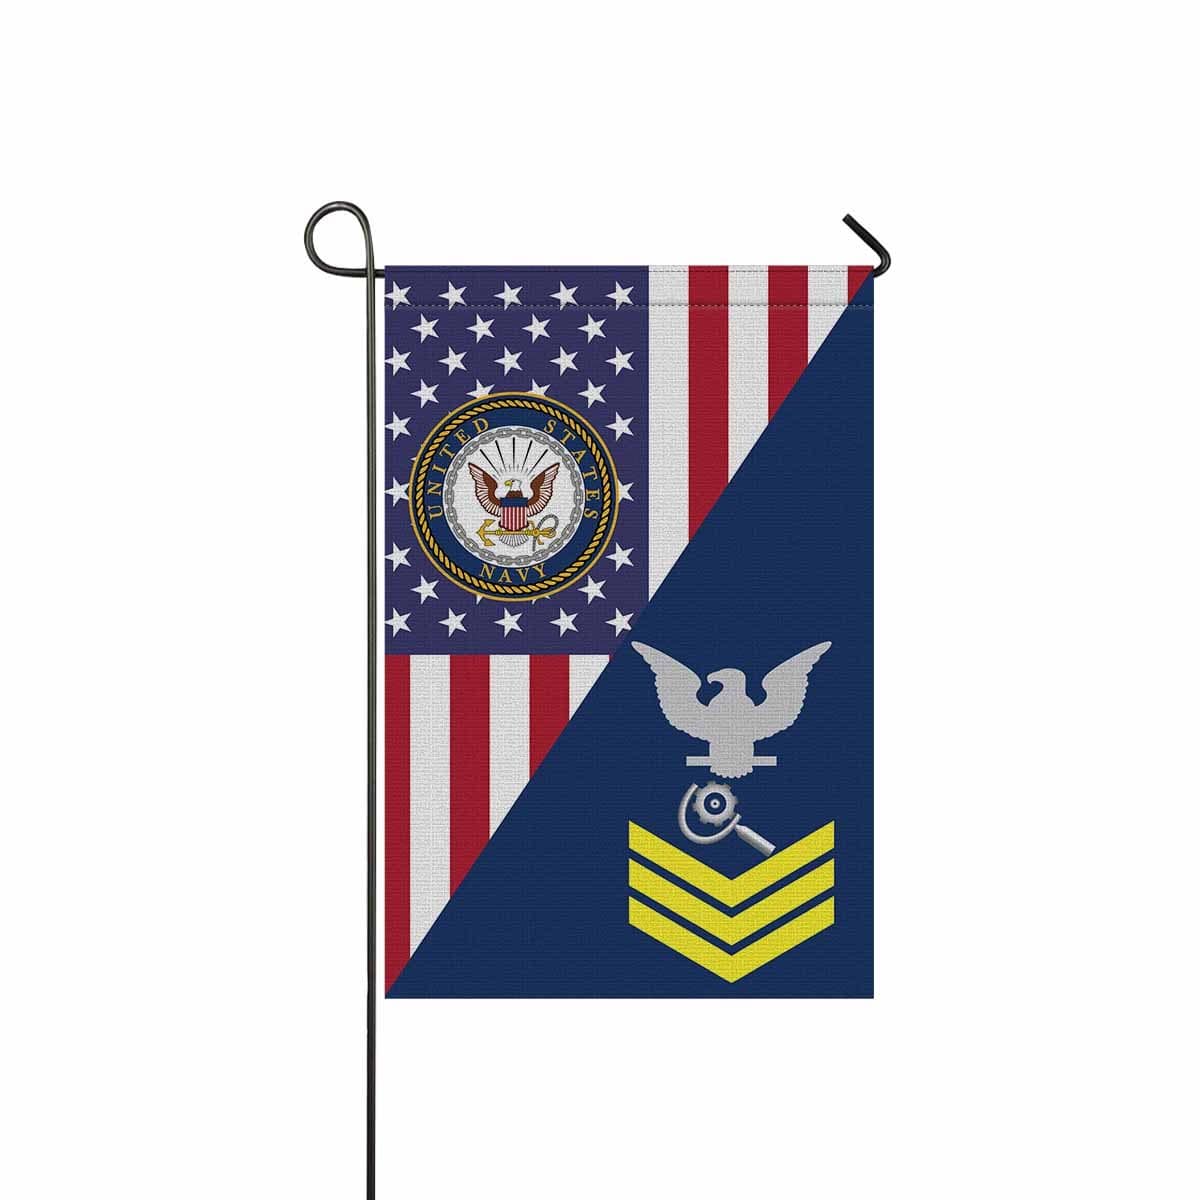 U.S Navy Machinery repairman Navy MR E-6 Gold Stripe Garden Flag/Yard Flag 12 inches x 18 inches Twin-Side Printing-GDFlag-Navy-Rating-Veterans Nation